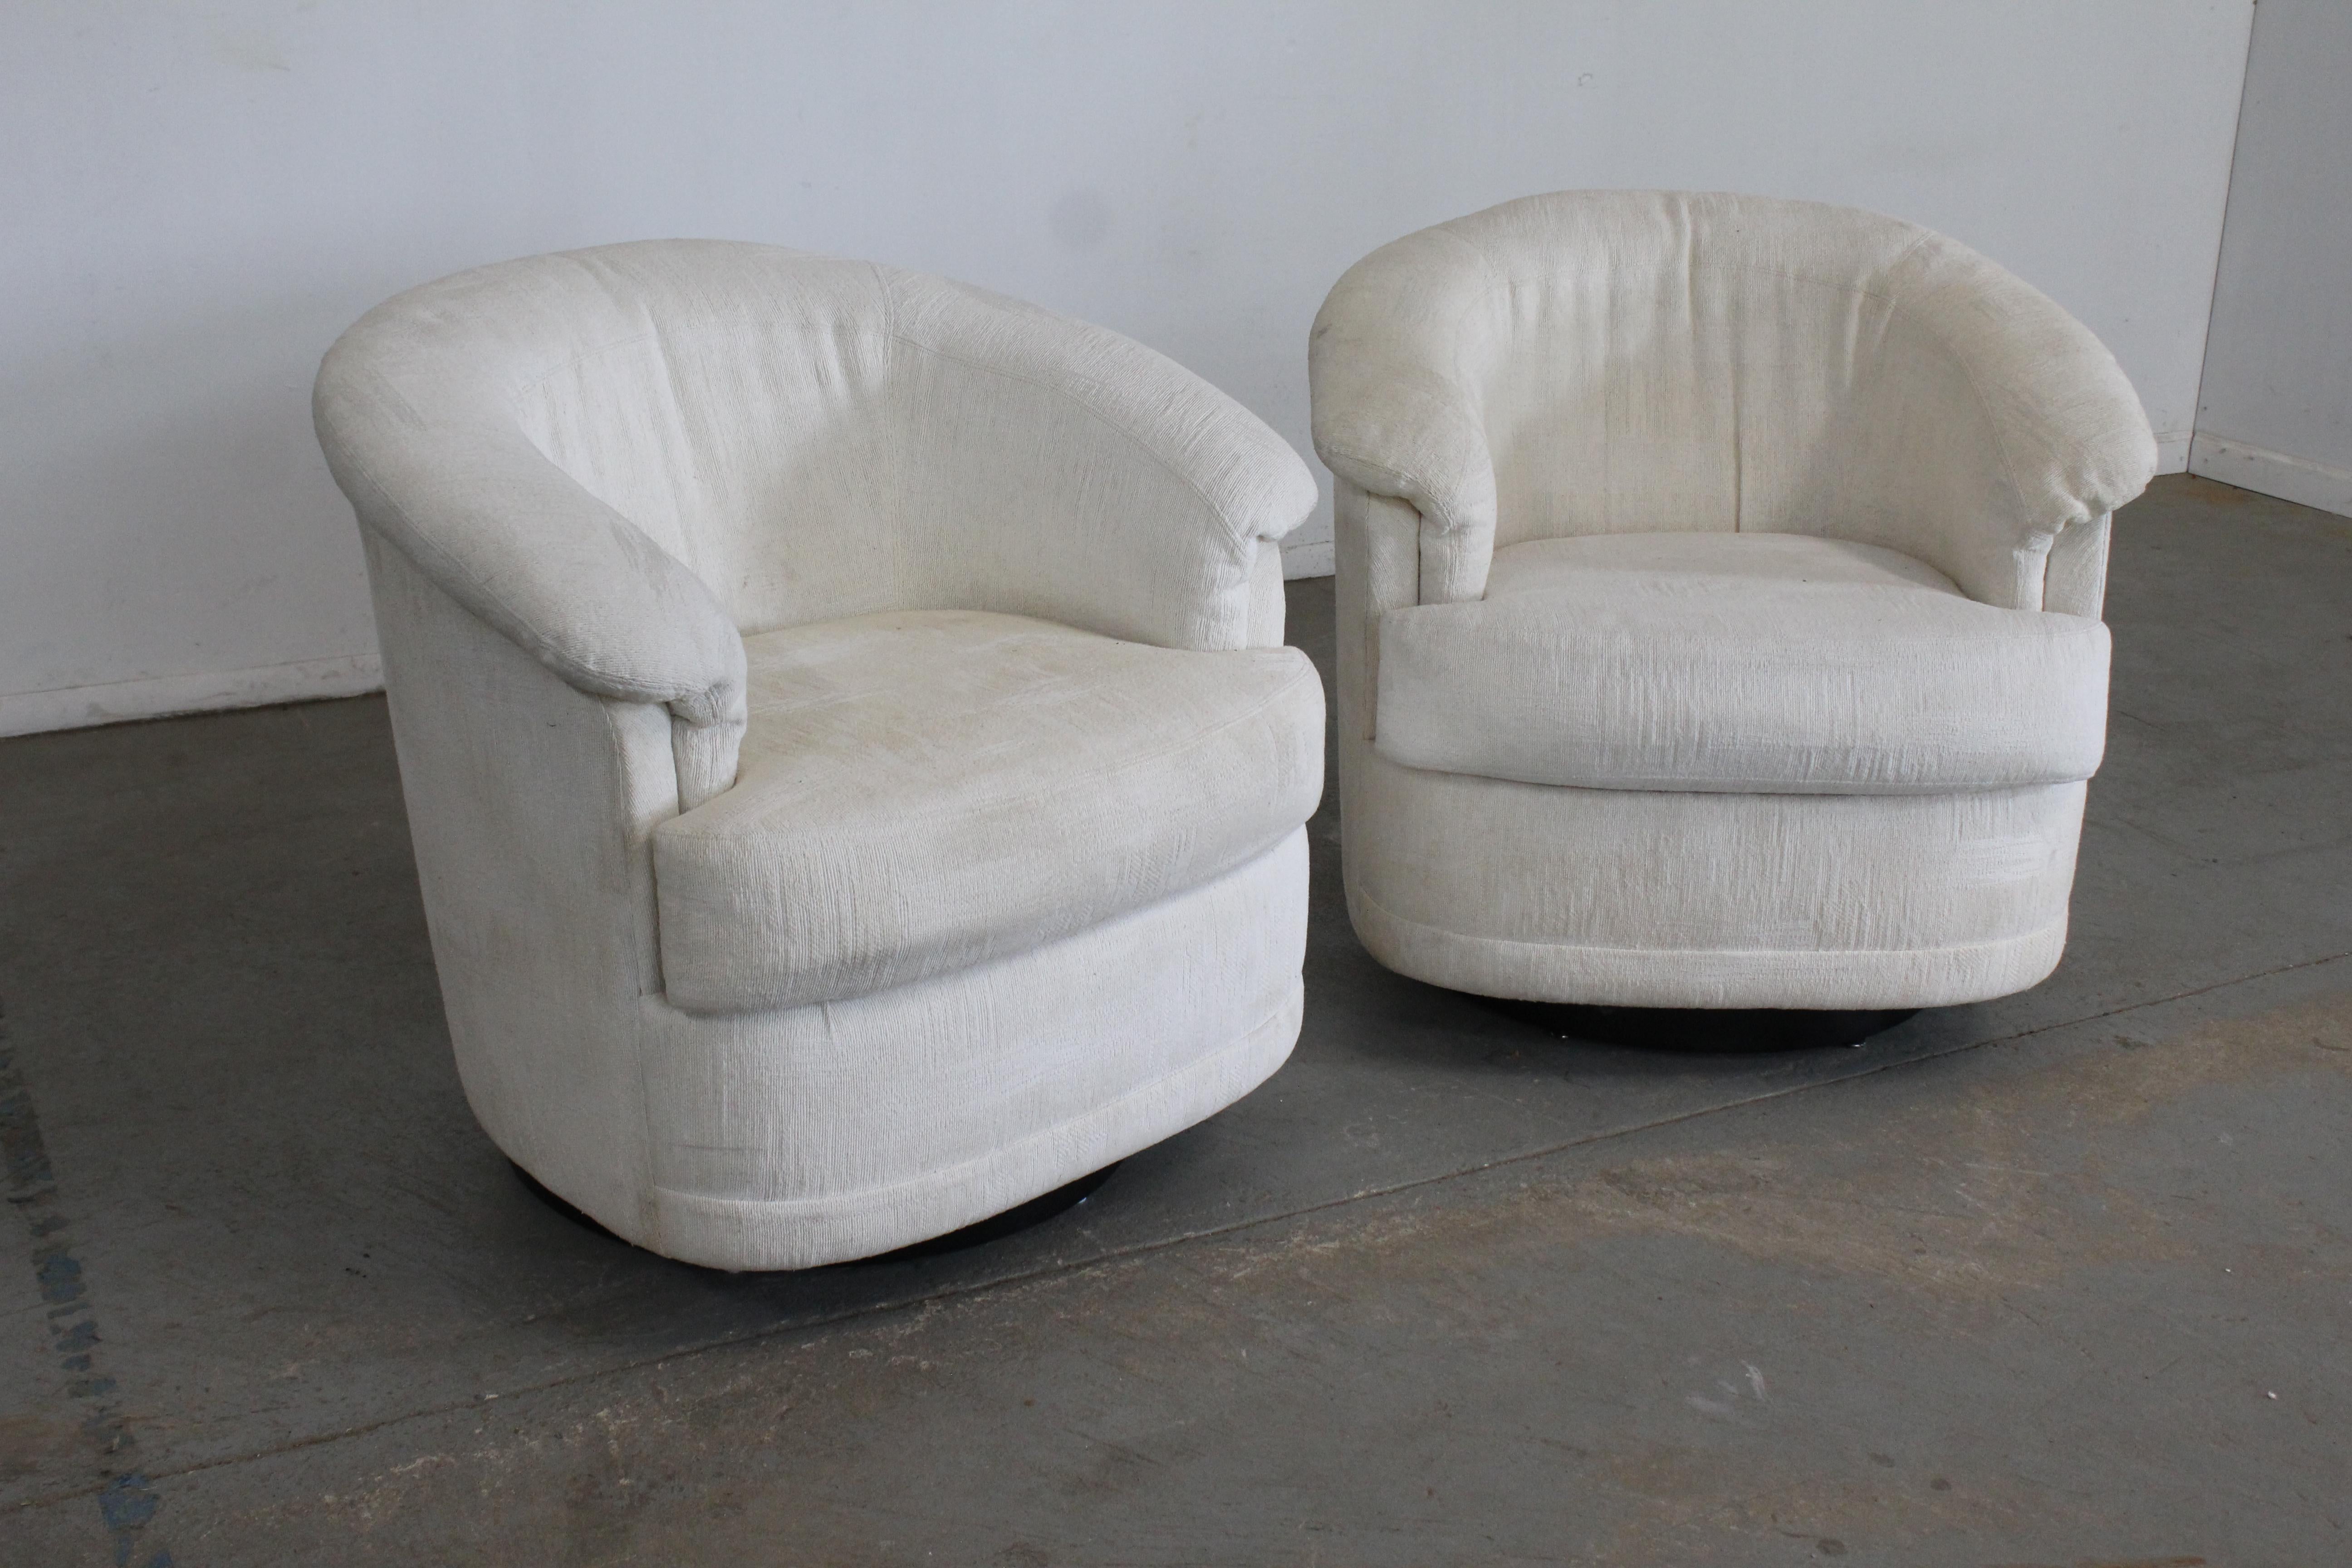 Pair of Mid-Century Modern Milo Baughman style swivel rocker club chairs.

 Offered is a pair of Mid-Century Modern Milo Baughman style swivel rocker chairs. These chairs rock and tilt. This unique pair need new upholstery or a serious steam